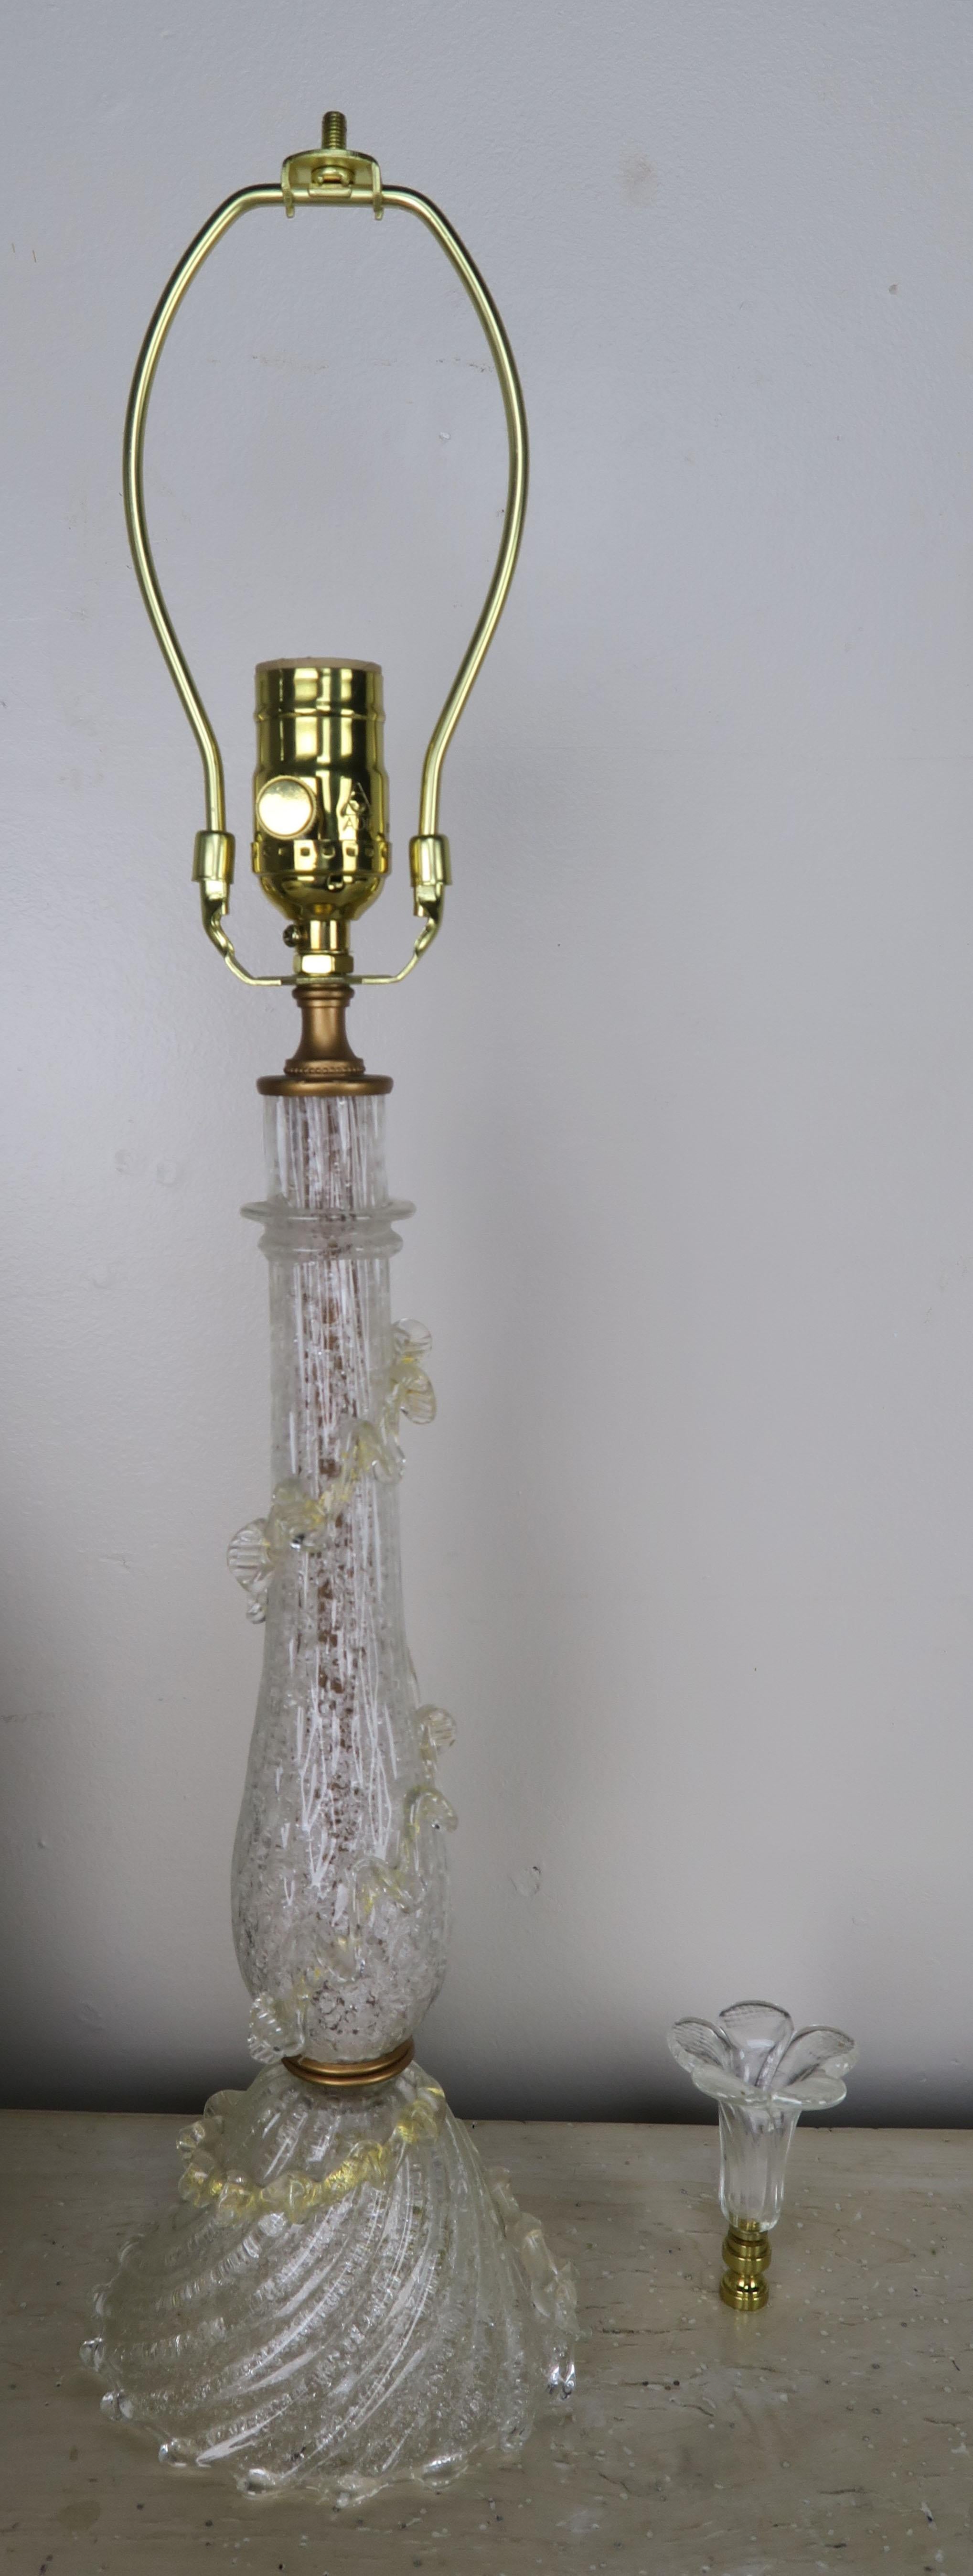 Hand-Crafted Italian Murano Lamps with Parchment Shades, Pair